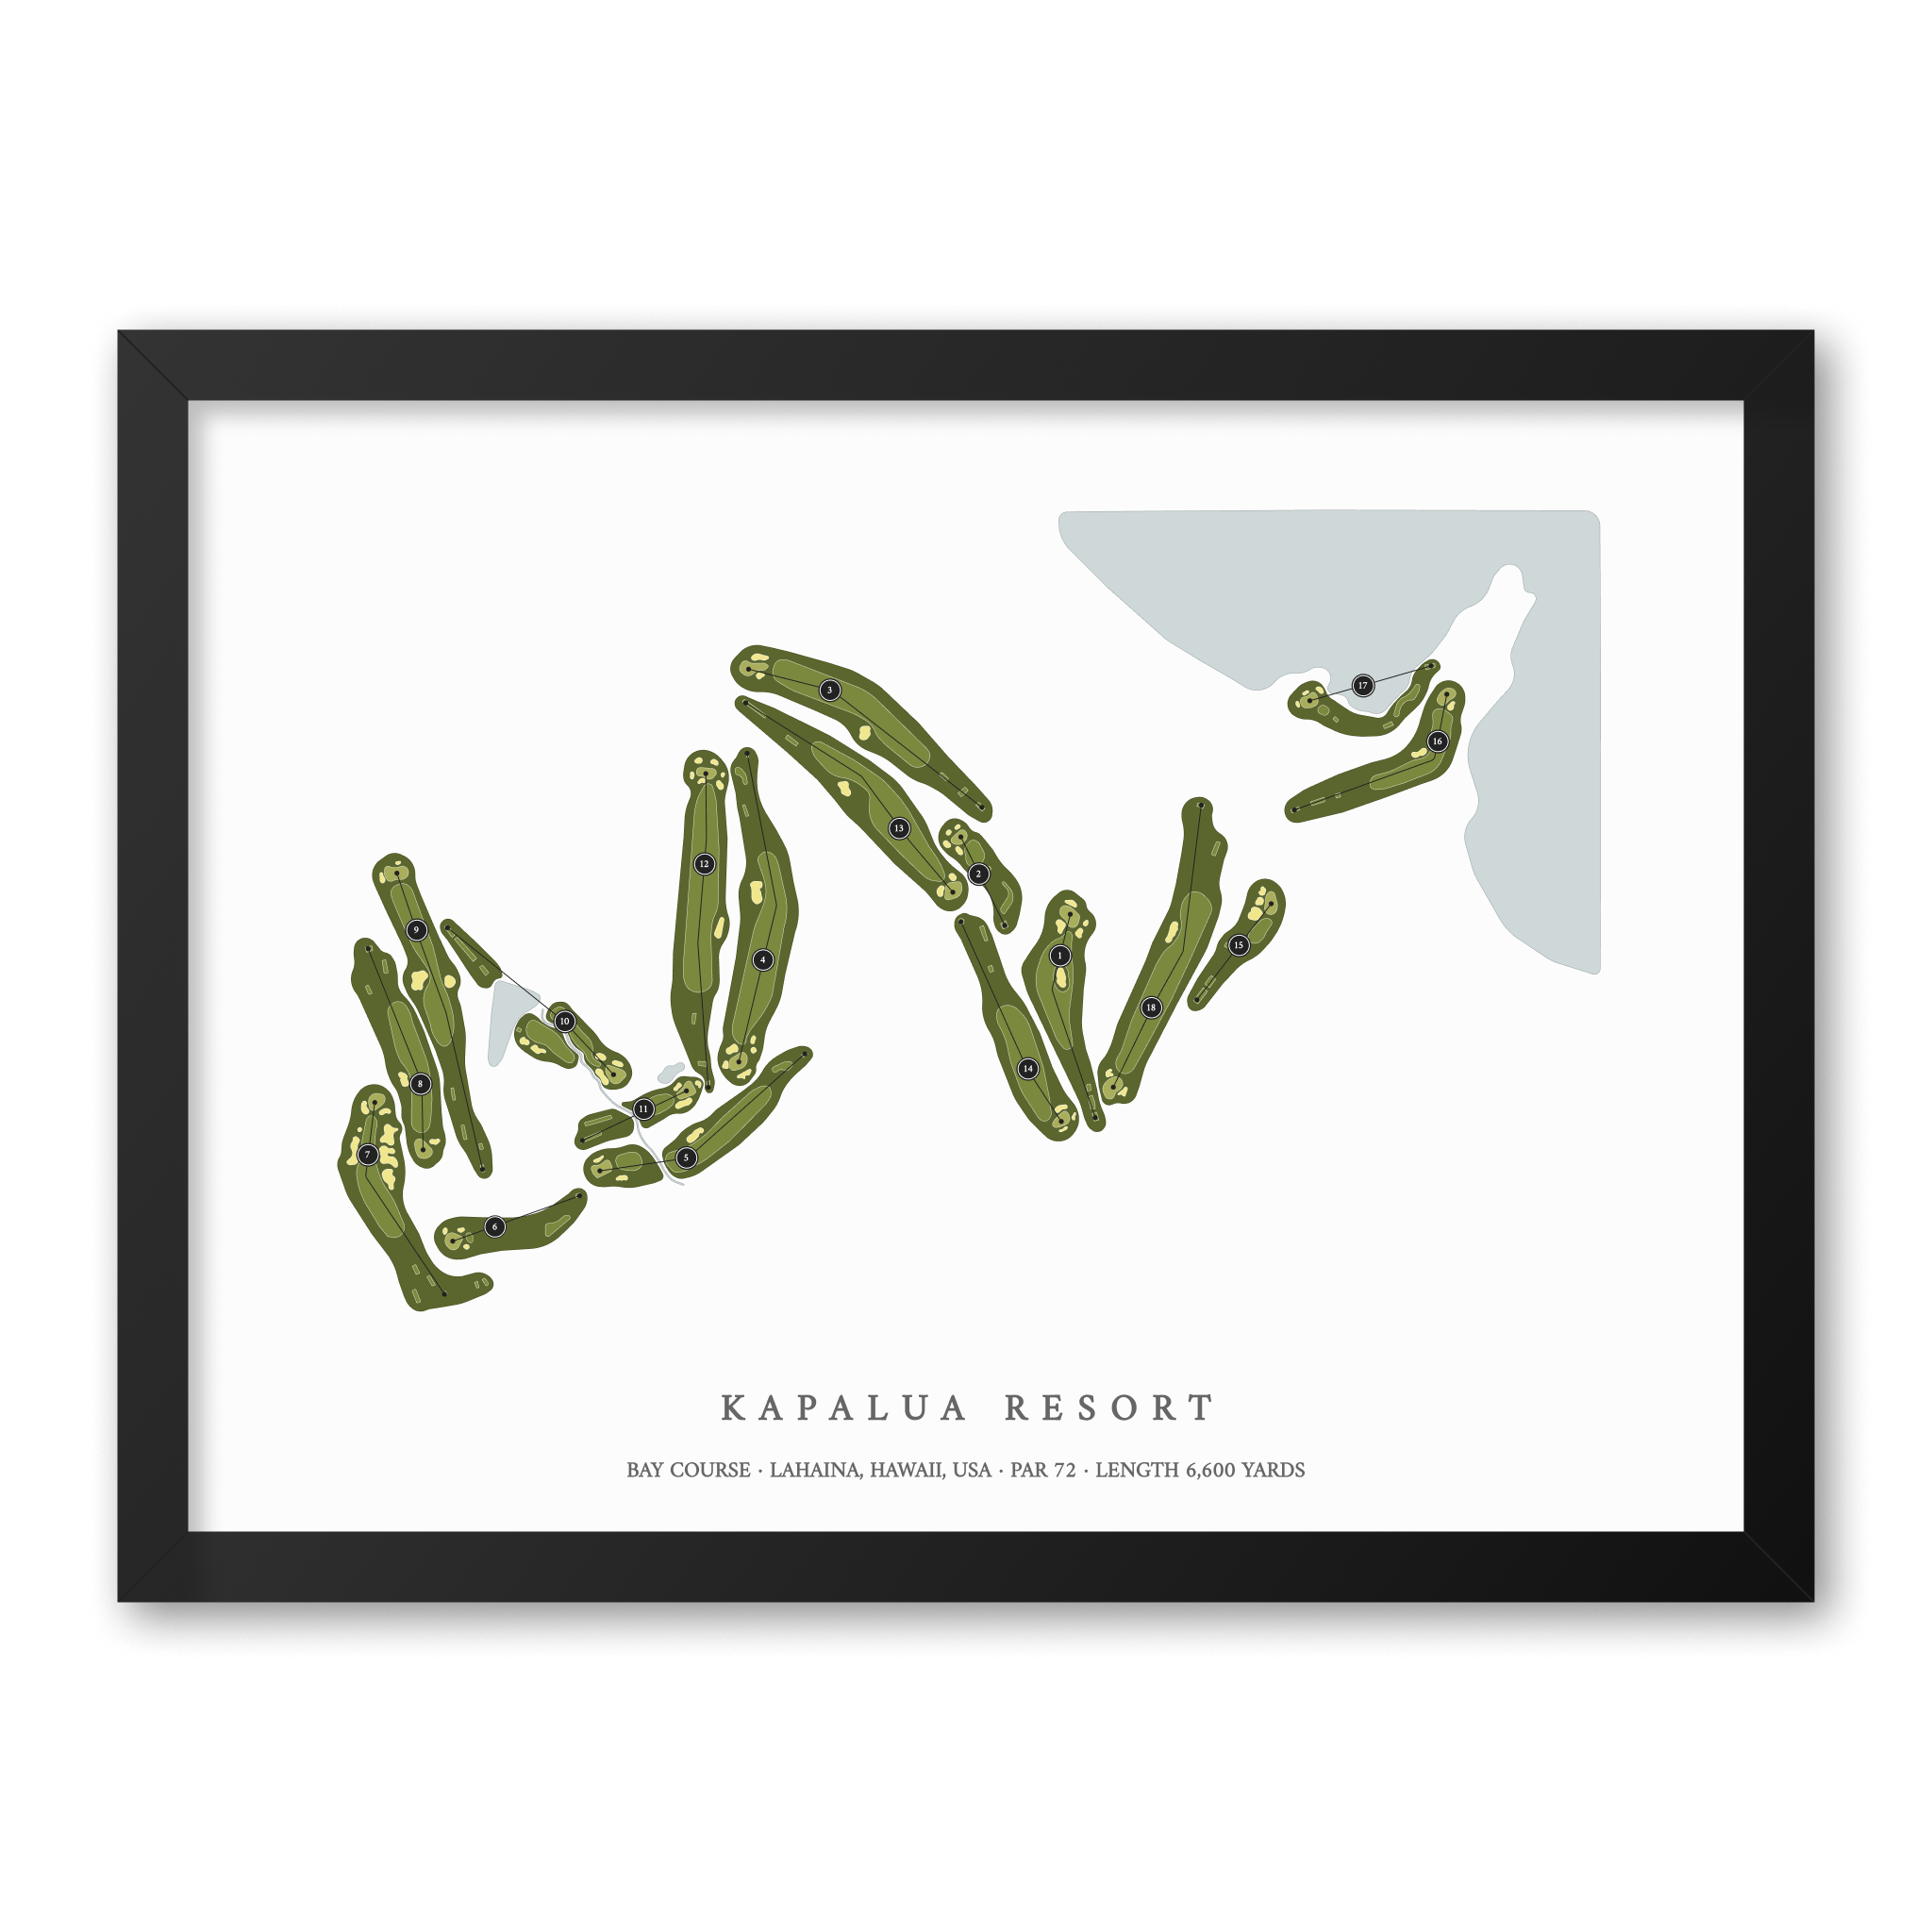 Kapalua Resort - The Bay Course| Golf Course Print | Black Frame With Hole Numbers #hole numbers_yes